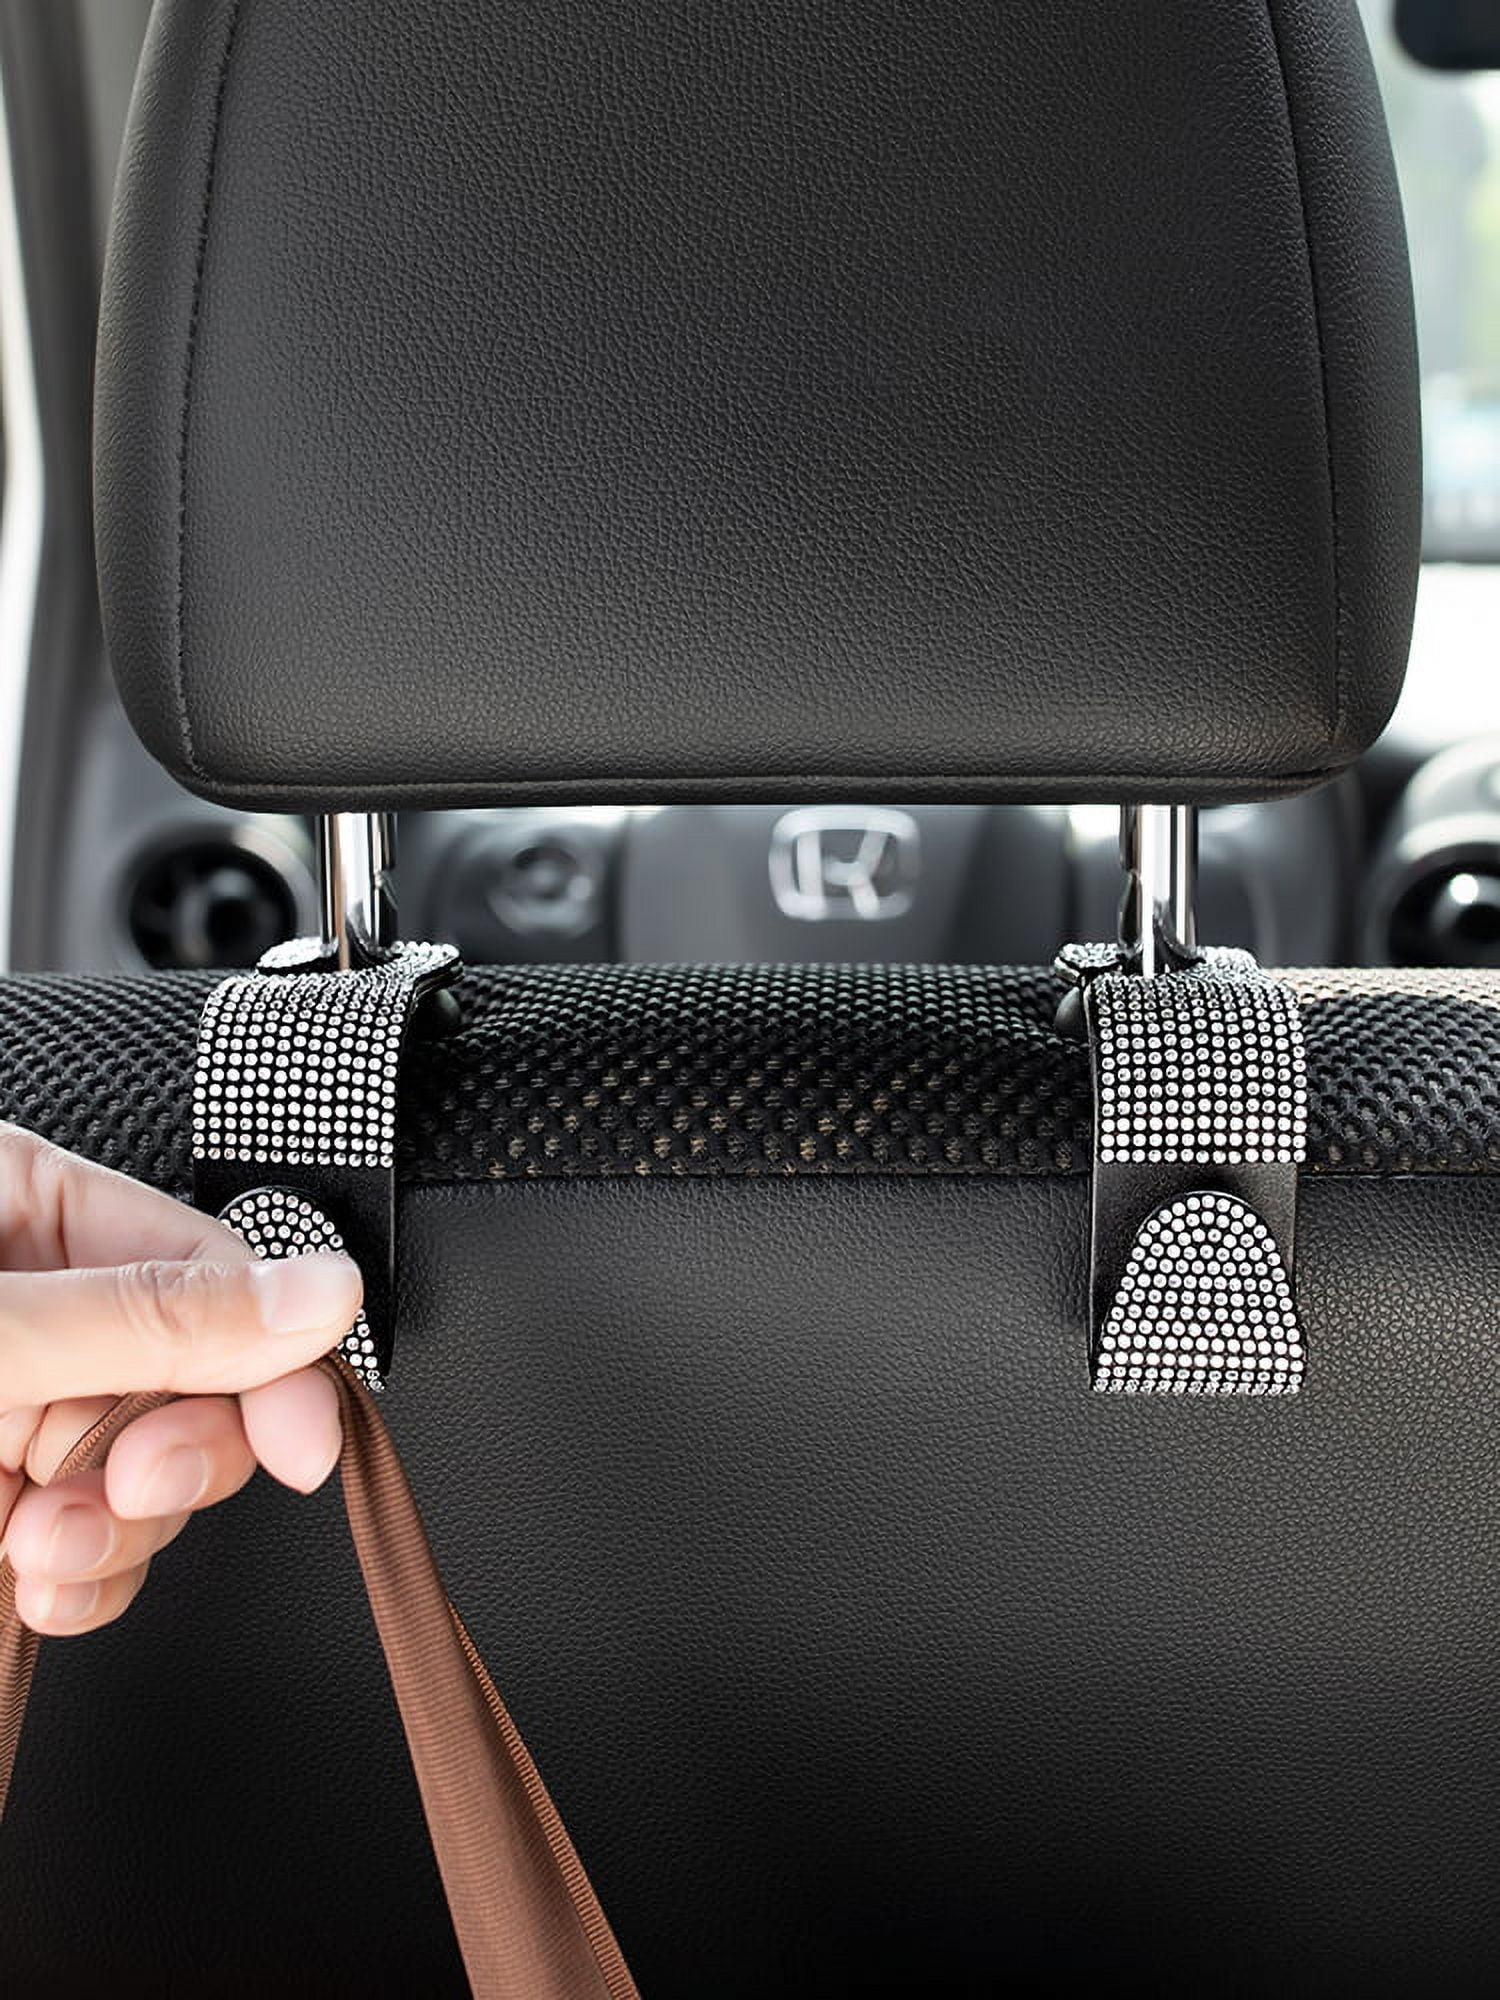 GARTIG Car Headrest Seat Hooks for Purses and Bags with Phone